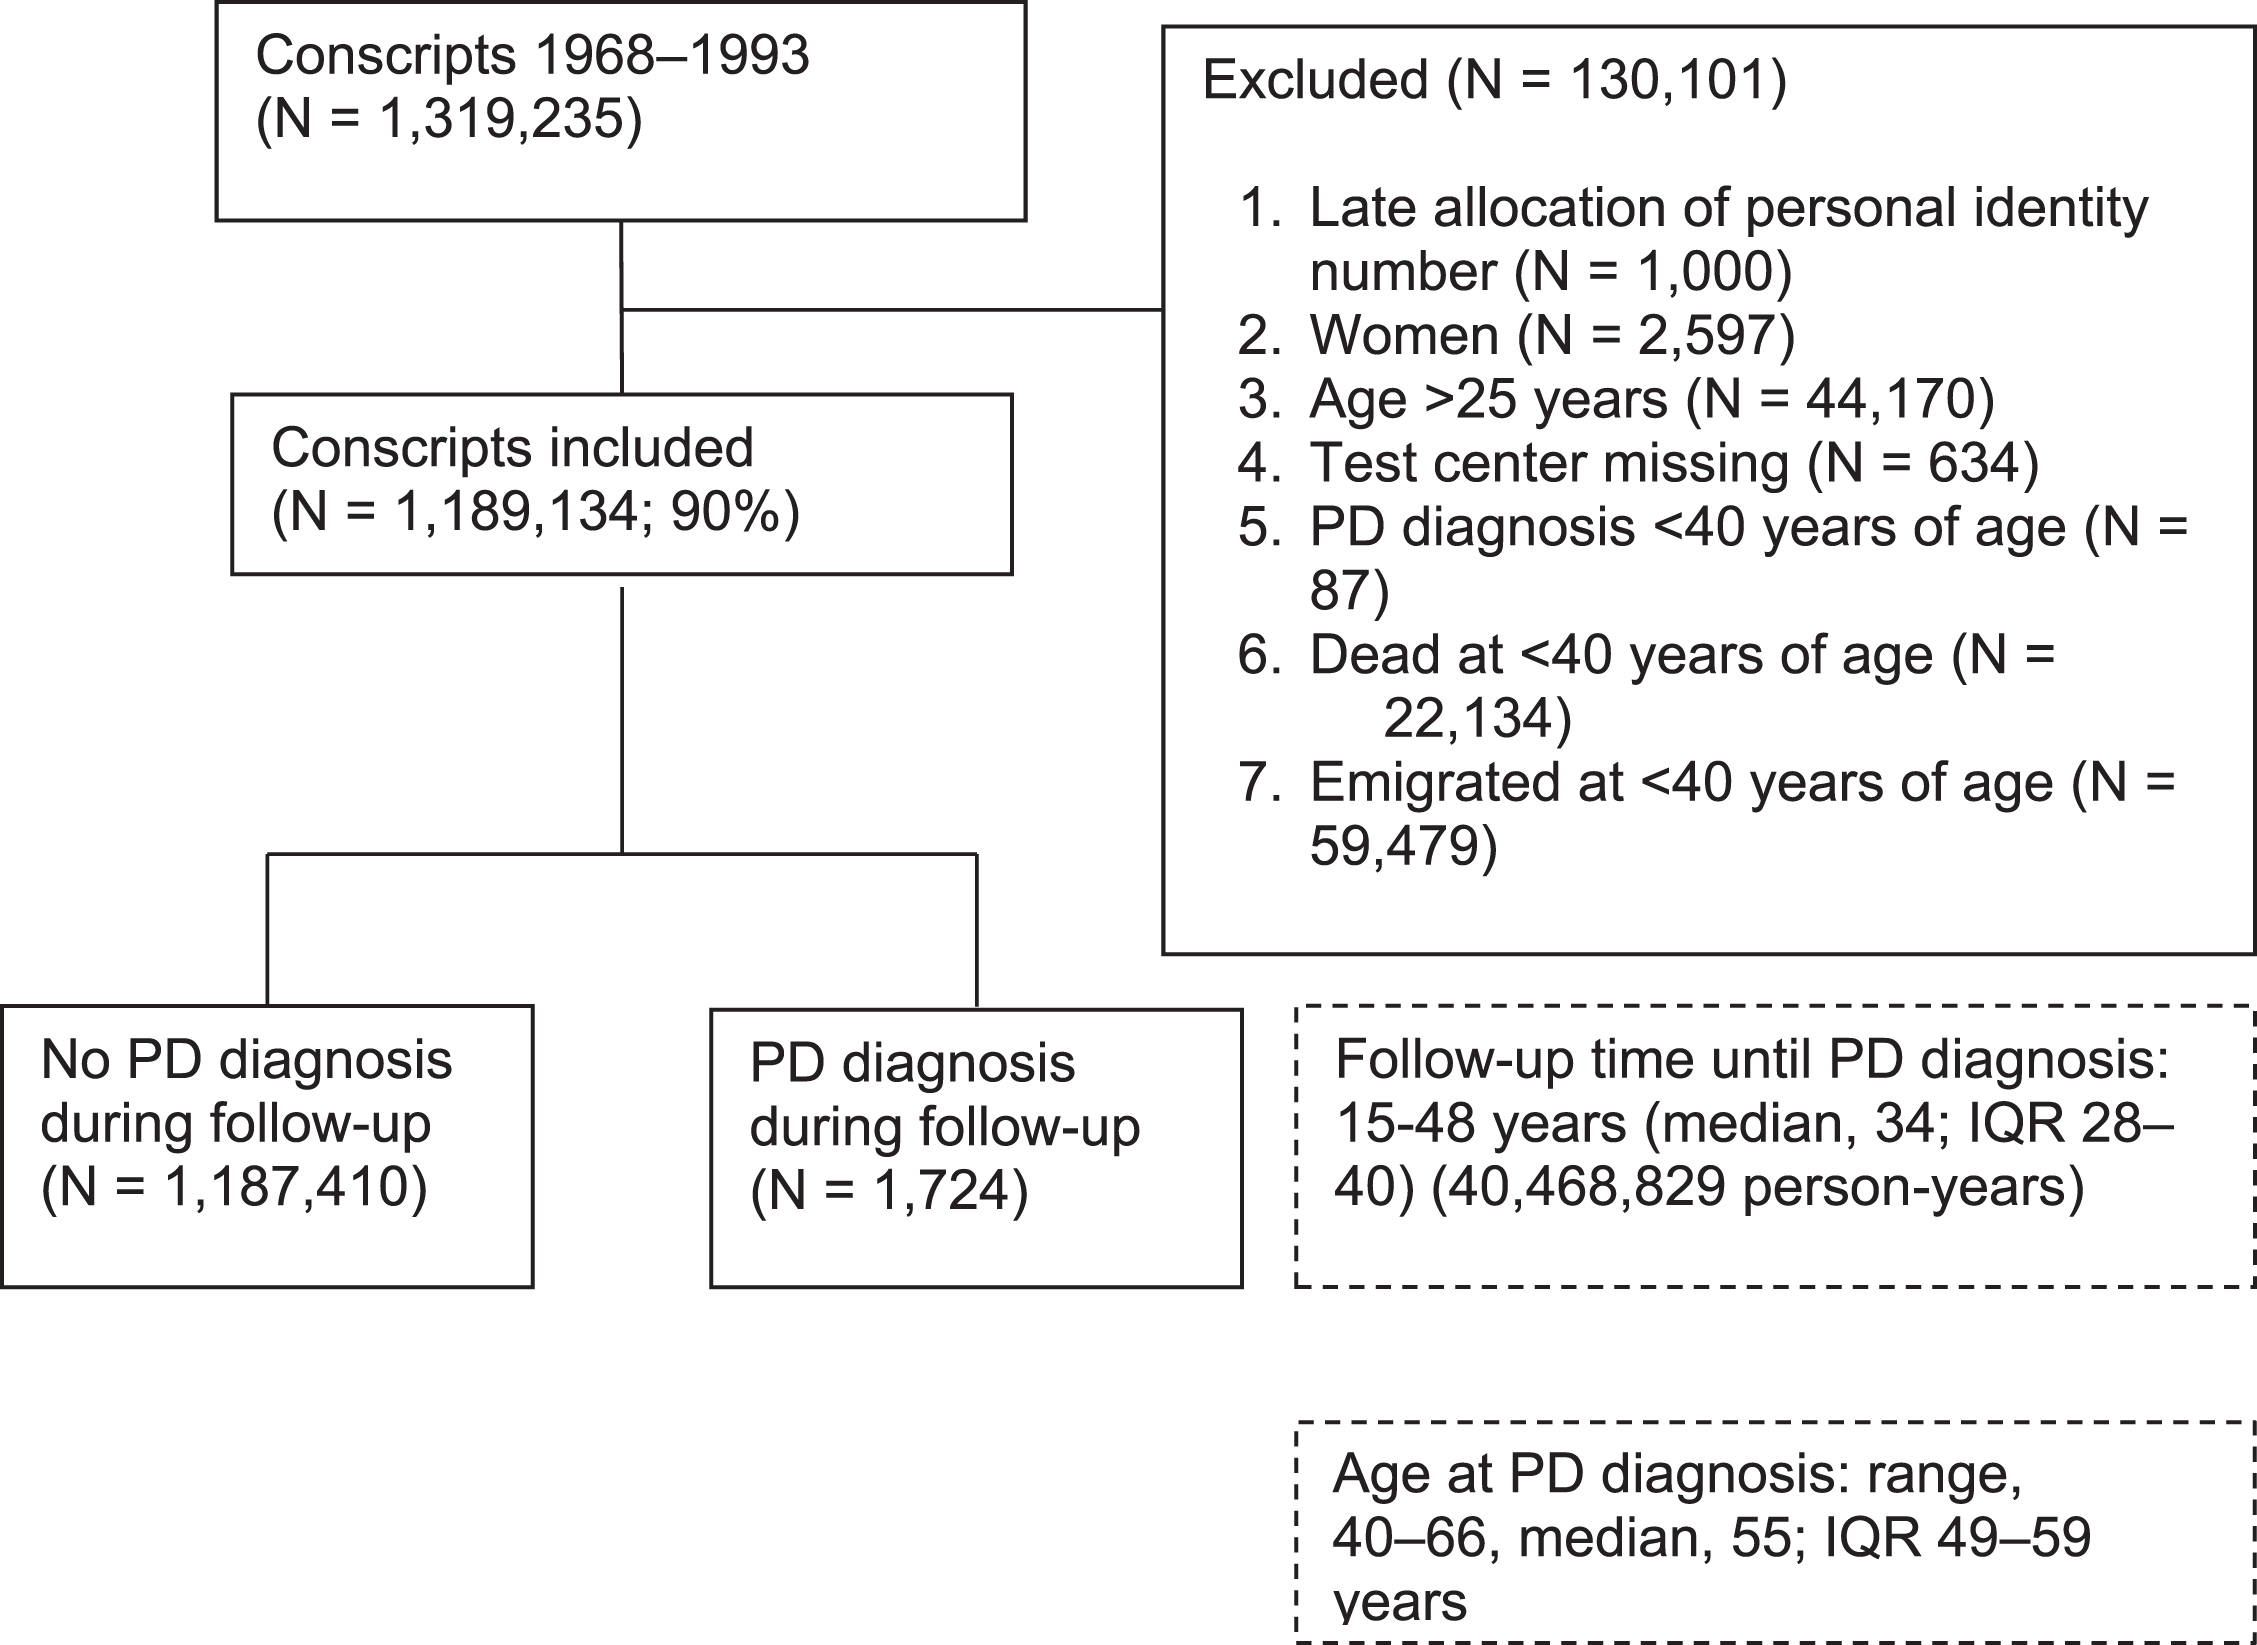 Flow chart illustrating the exclusion criteria, number of diagnoses of Parkinson’s disease (PD), and follow-up time of the Swedish male conscript study population in the period 1968-1993, based on the recommendations in Strengthening the Reporting of Observational Studies in Epidemiology (STROBE) [38].